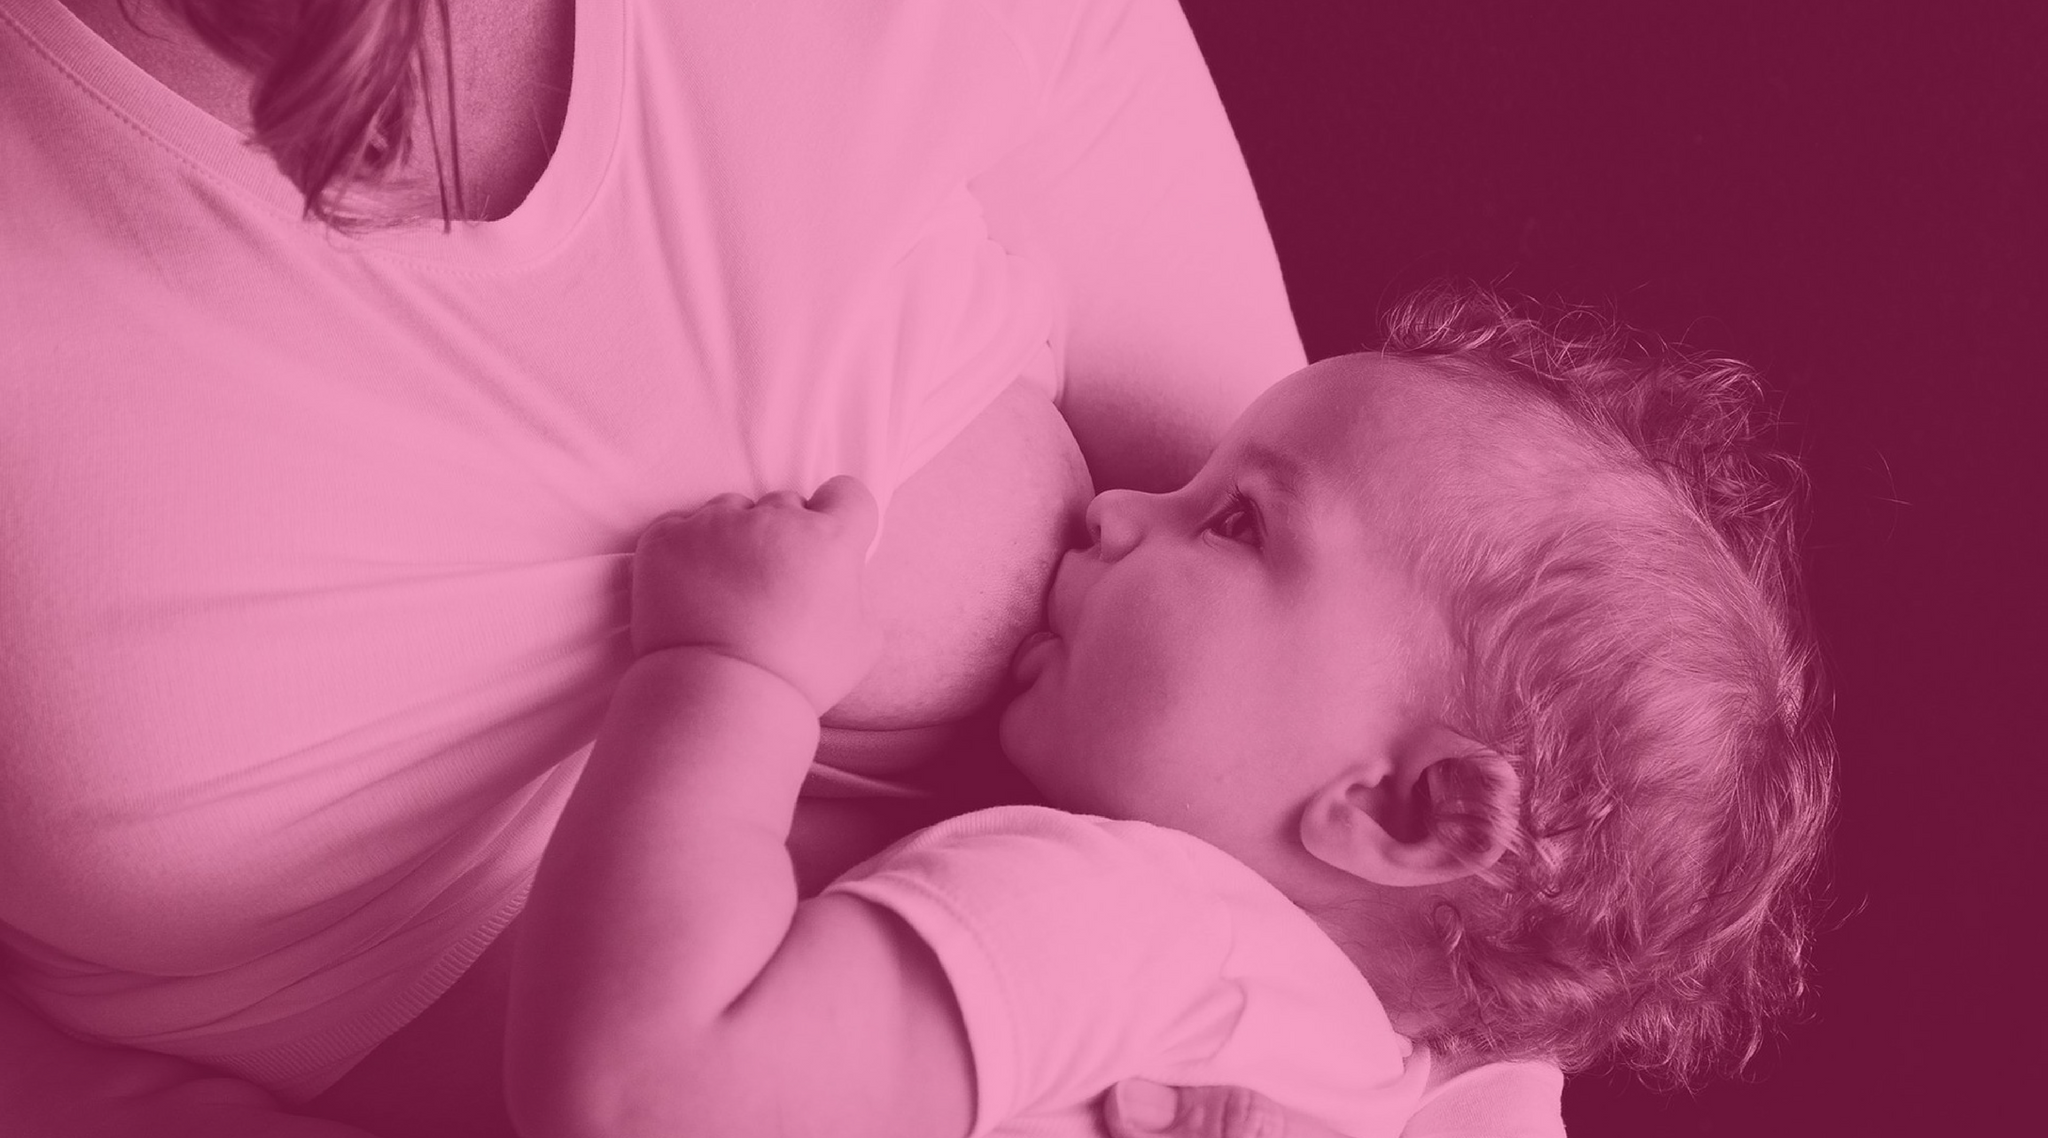 Breastfeeding Tips: What Moms Need to Know Before Your Newborn Arrives | Nursing your newborn baby isn’t an easy task. We’ve rounded up the best & most important tips every new mom should know before starting to breastfeed. | New Parent Tips 